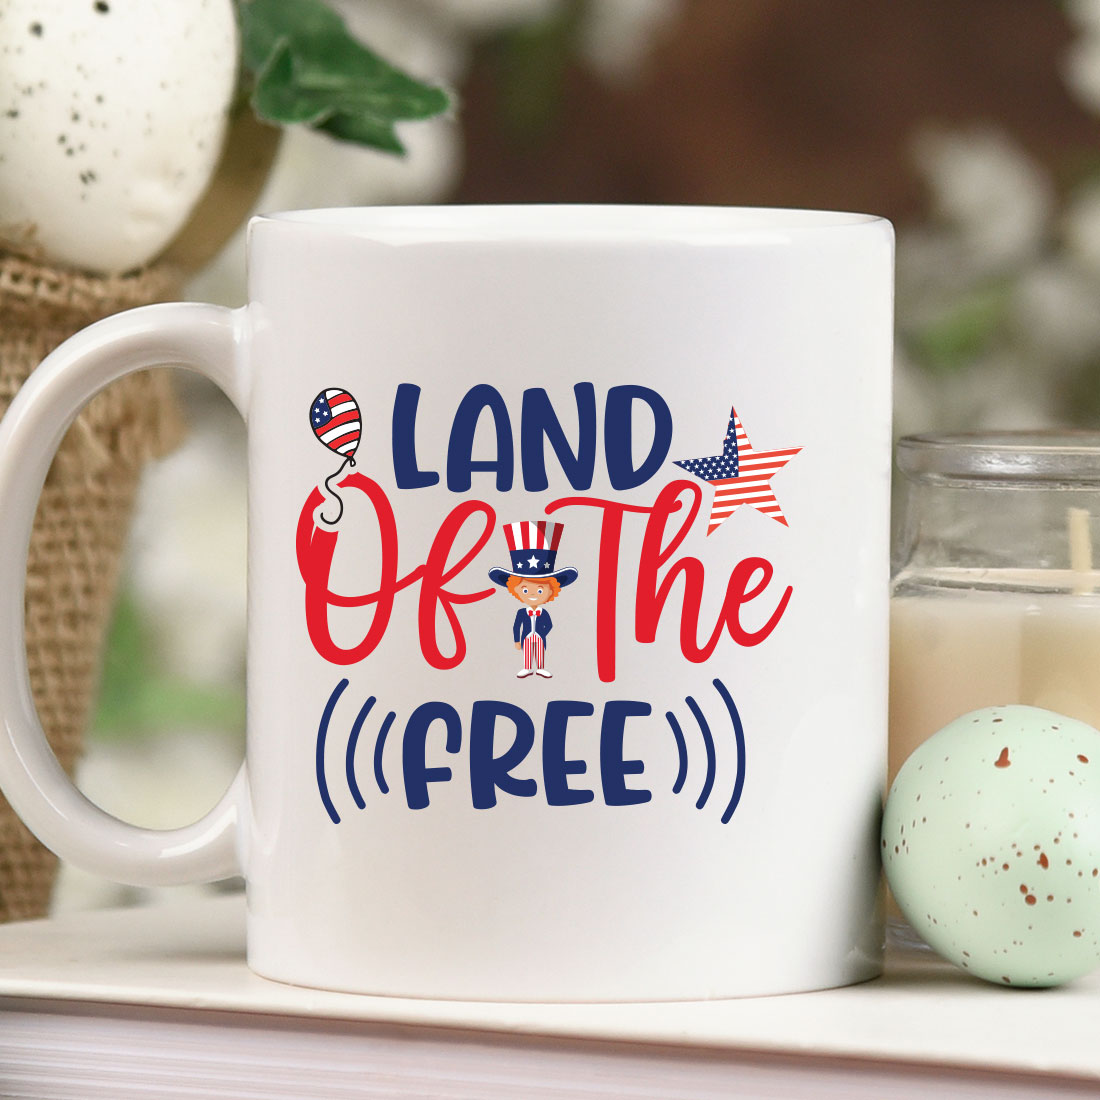 Coffee mug with the words land of the free on it next to a candle.